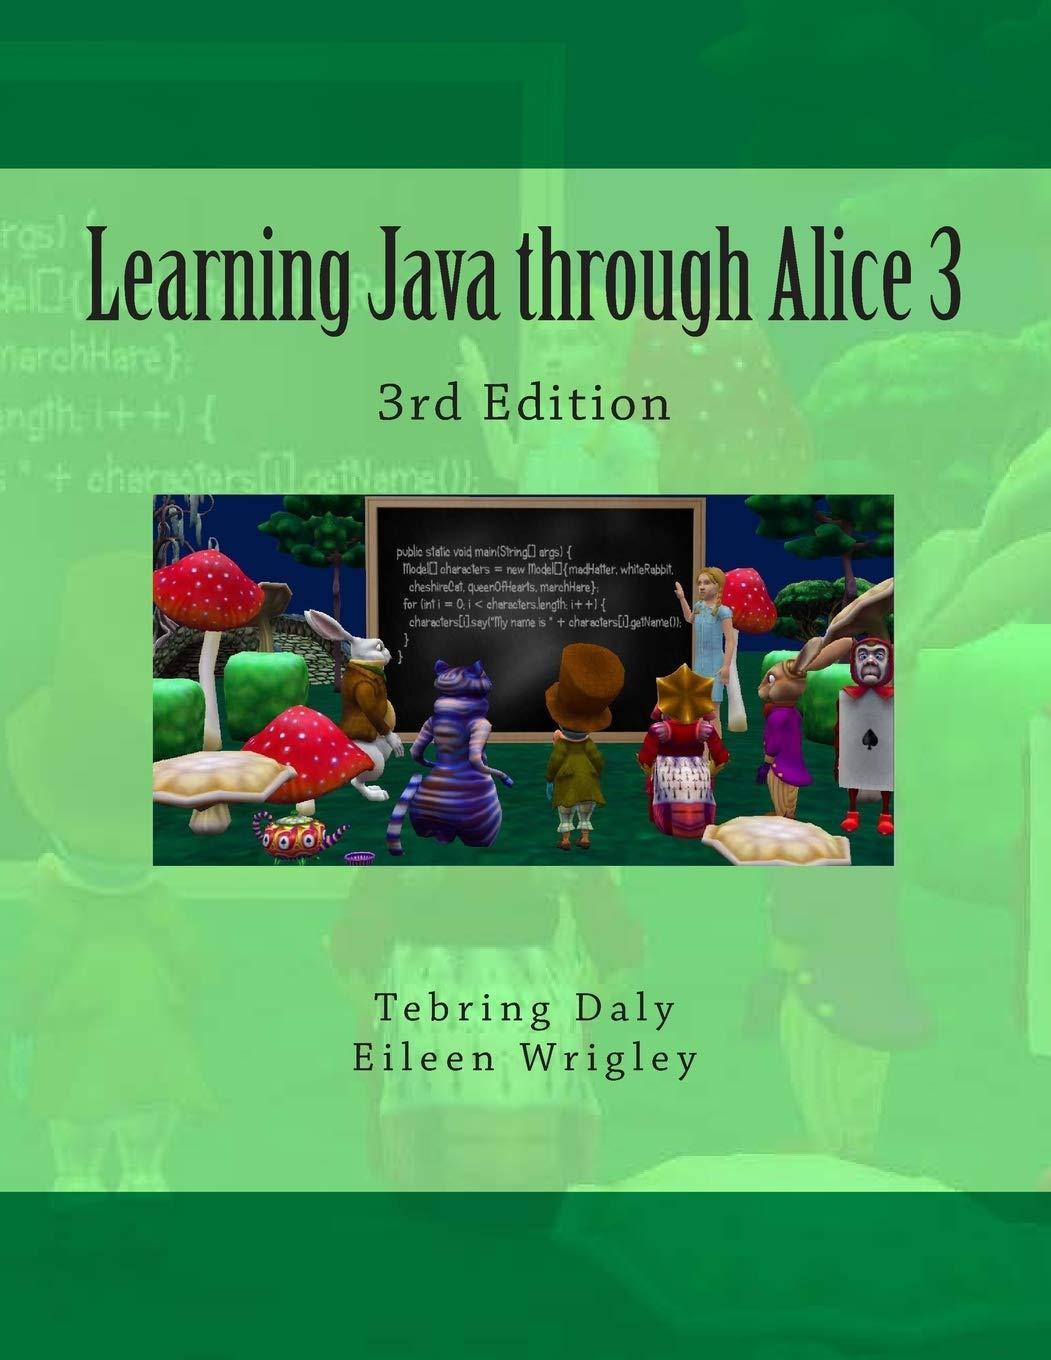 learning java through alice 3 3rd edition tebring daly, eileen wrigley 1514278901, 978-1514278901